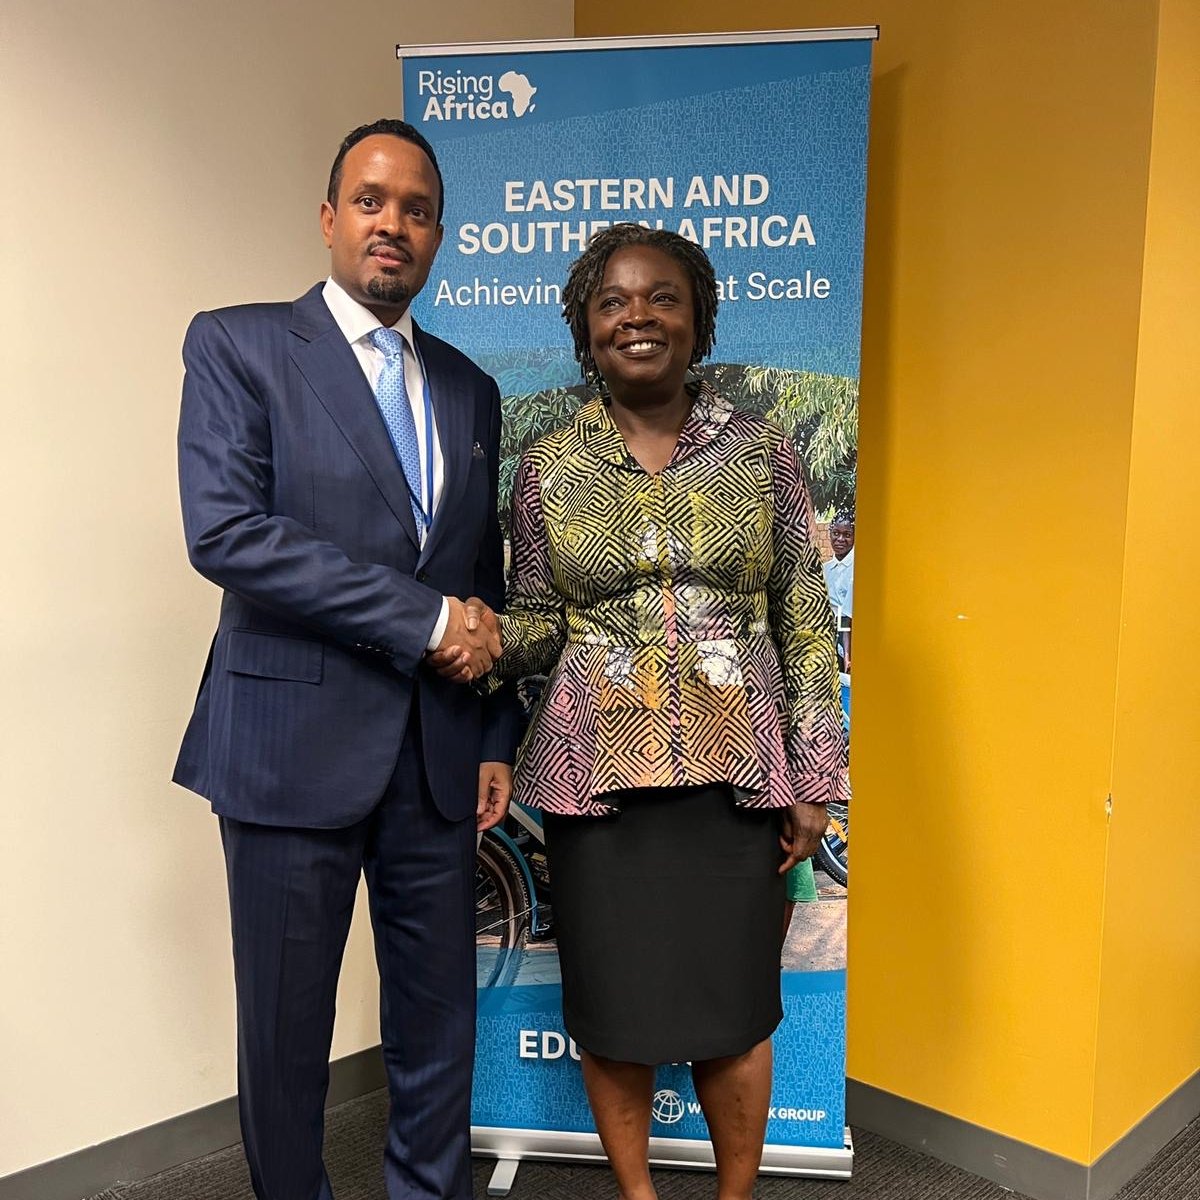 Good meeting with @MoF_Ethiopia Minister Ahmed Shide at the #WBGMeetings. We agreed to speed up work on a program to support #Ethiopia's reforms and ensure adequate social protection to protect the most vulnerable Ethiopians.